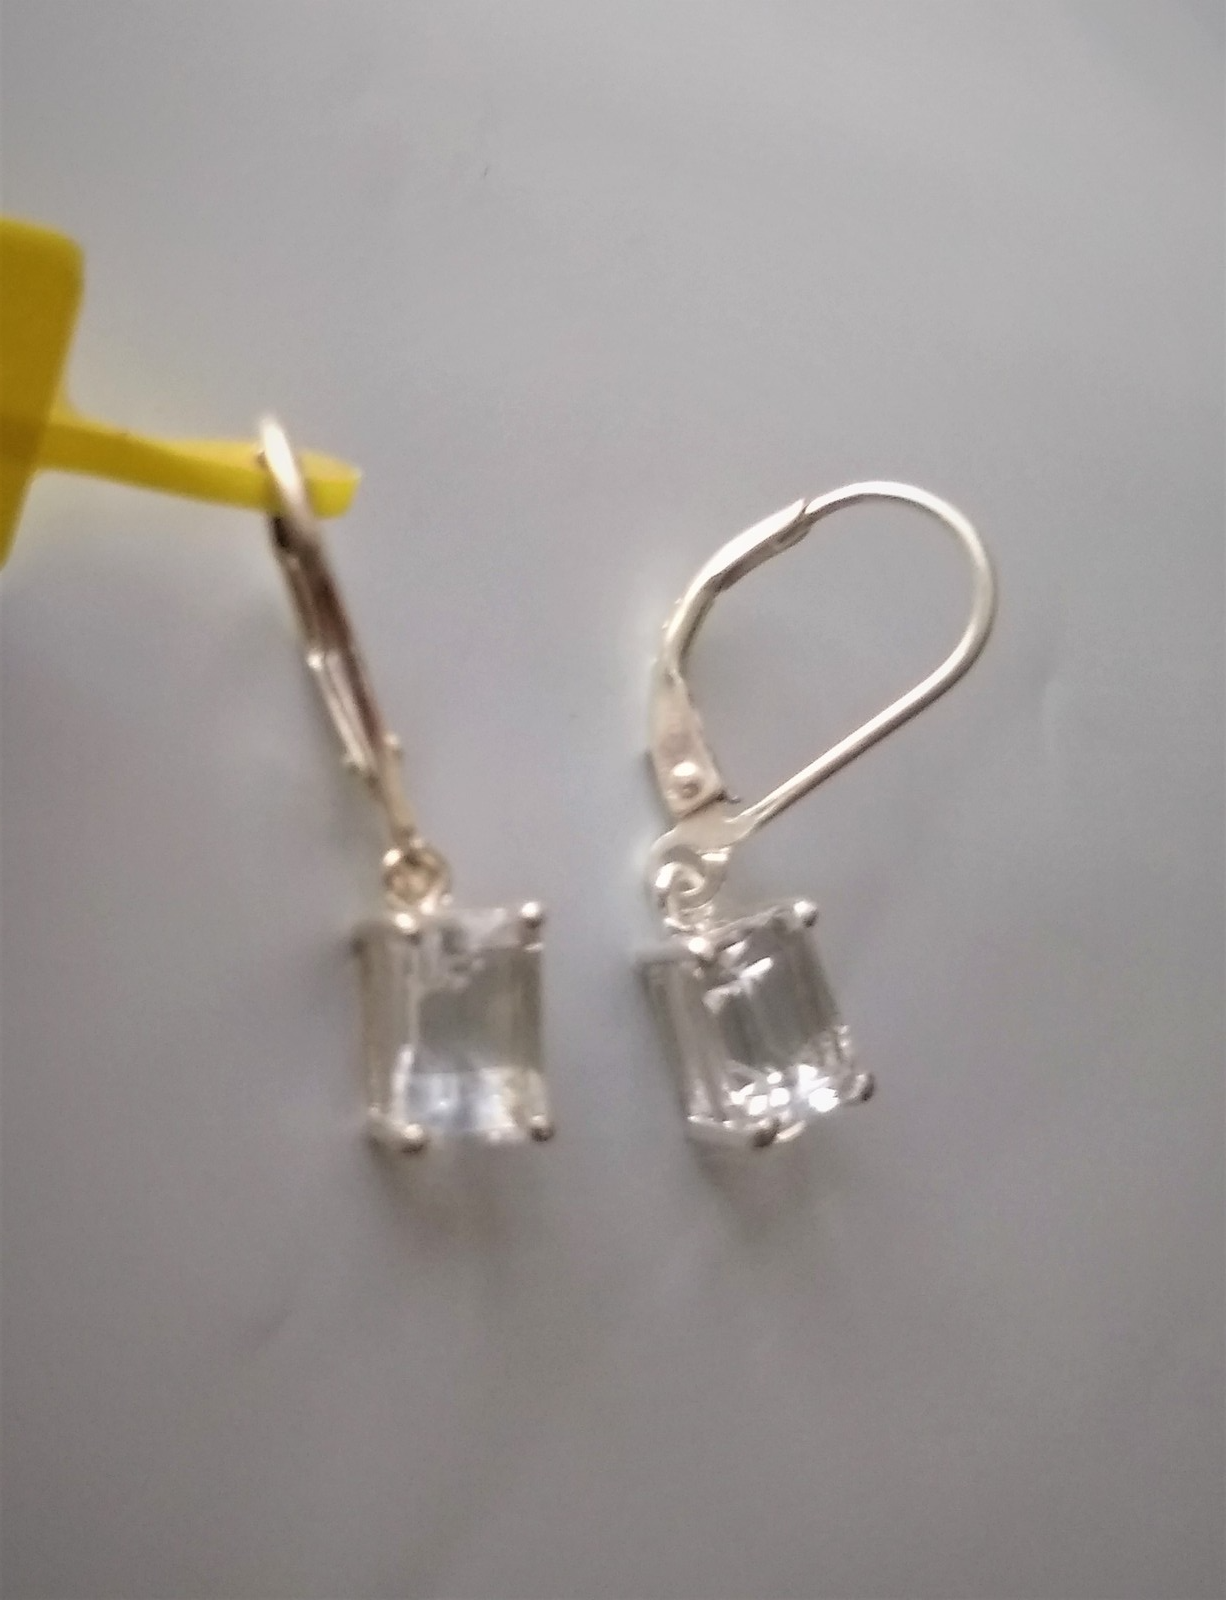 WHITE TOPAZ OCTAGON SOLITAIRE LEVER BACK EARRINGS, STERLING, 2.45(TCW) - $39.99